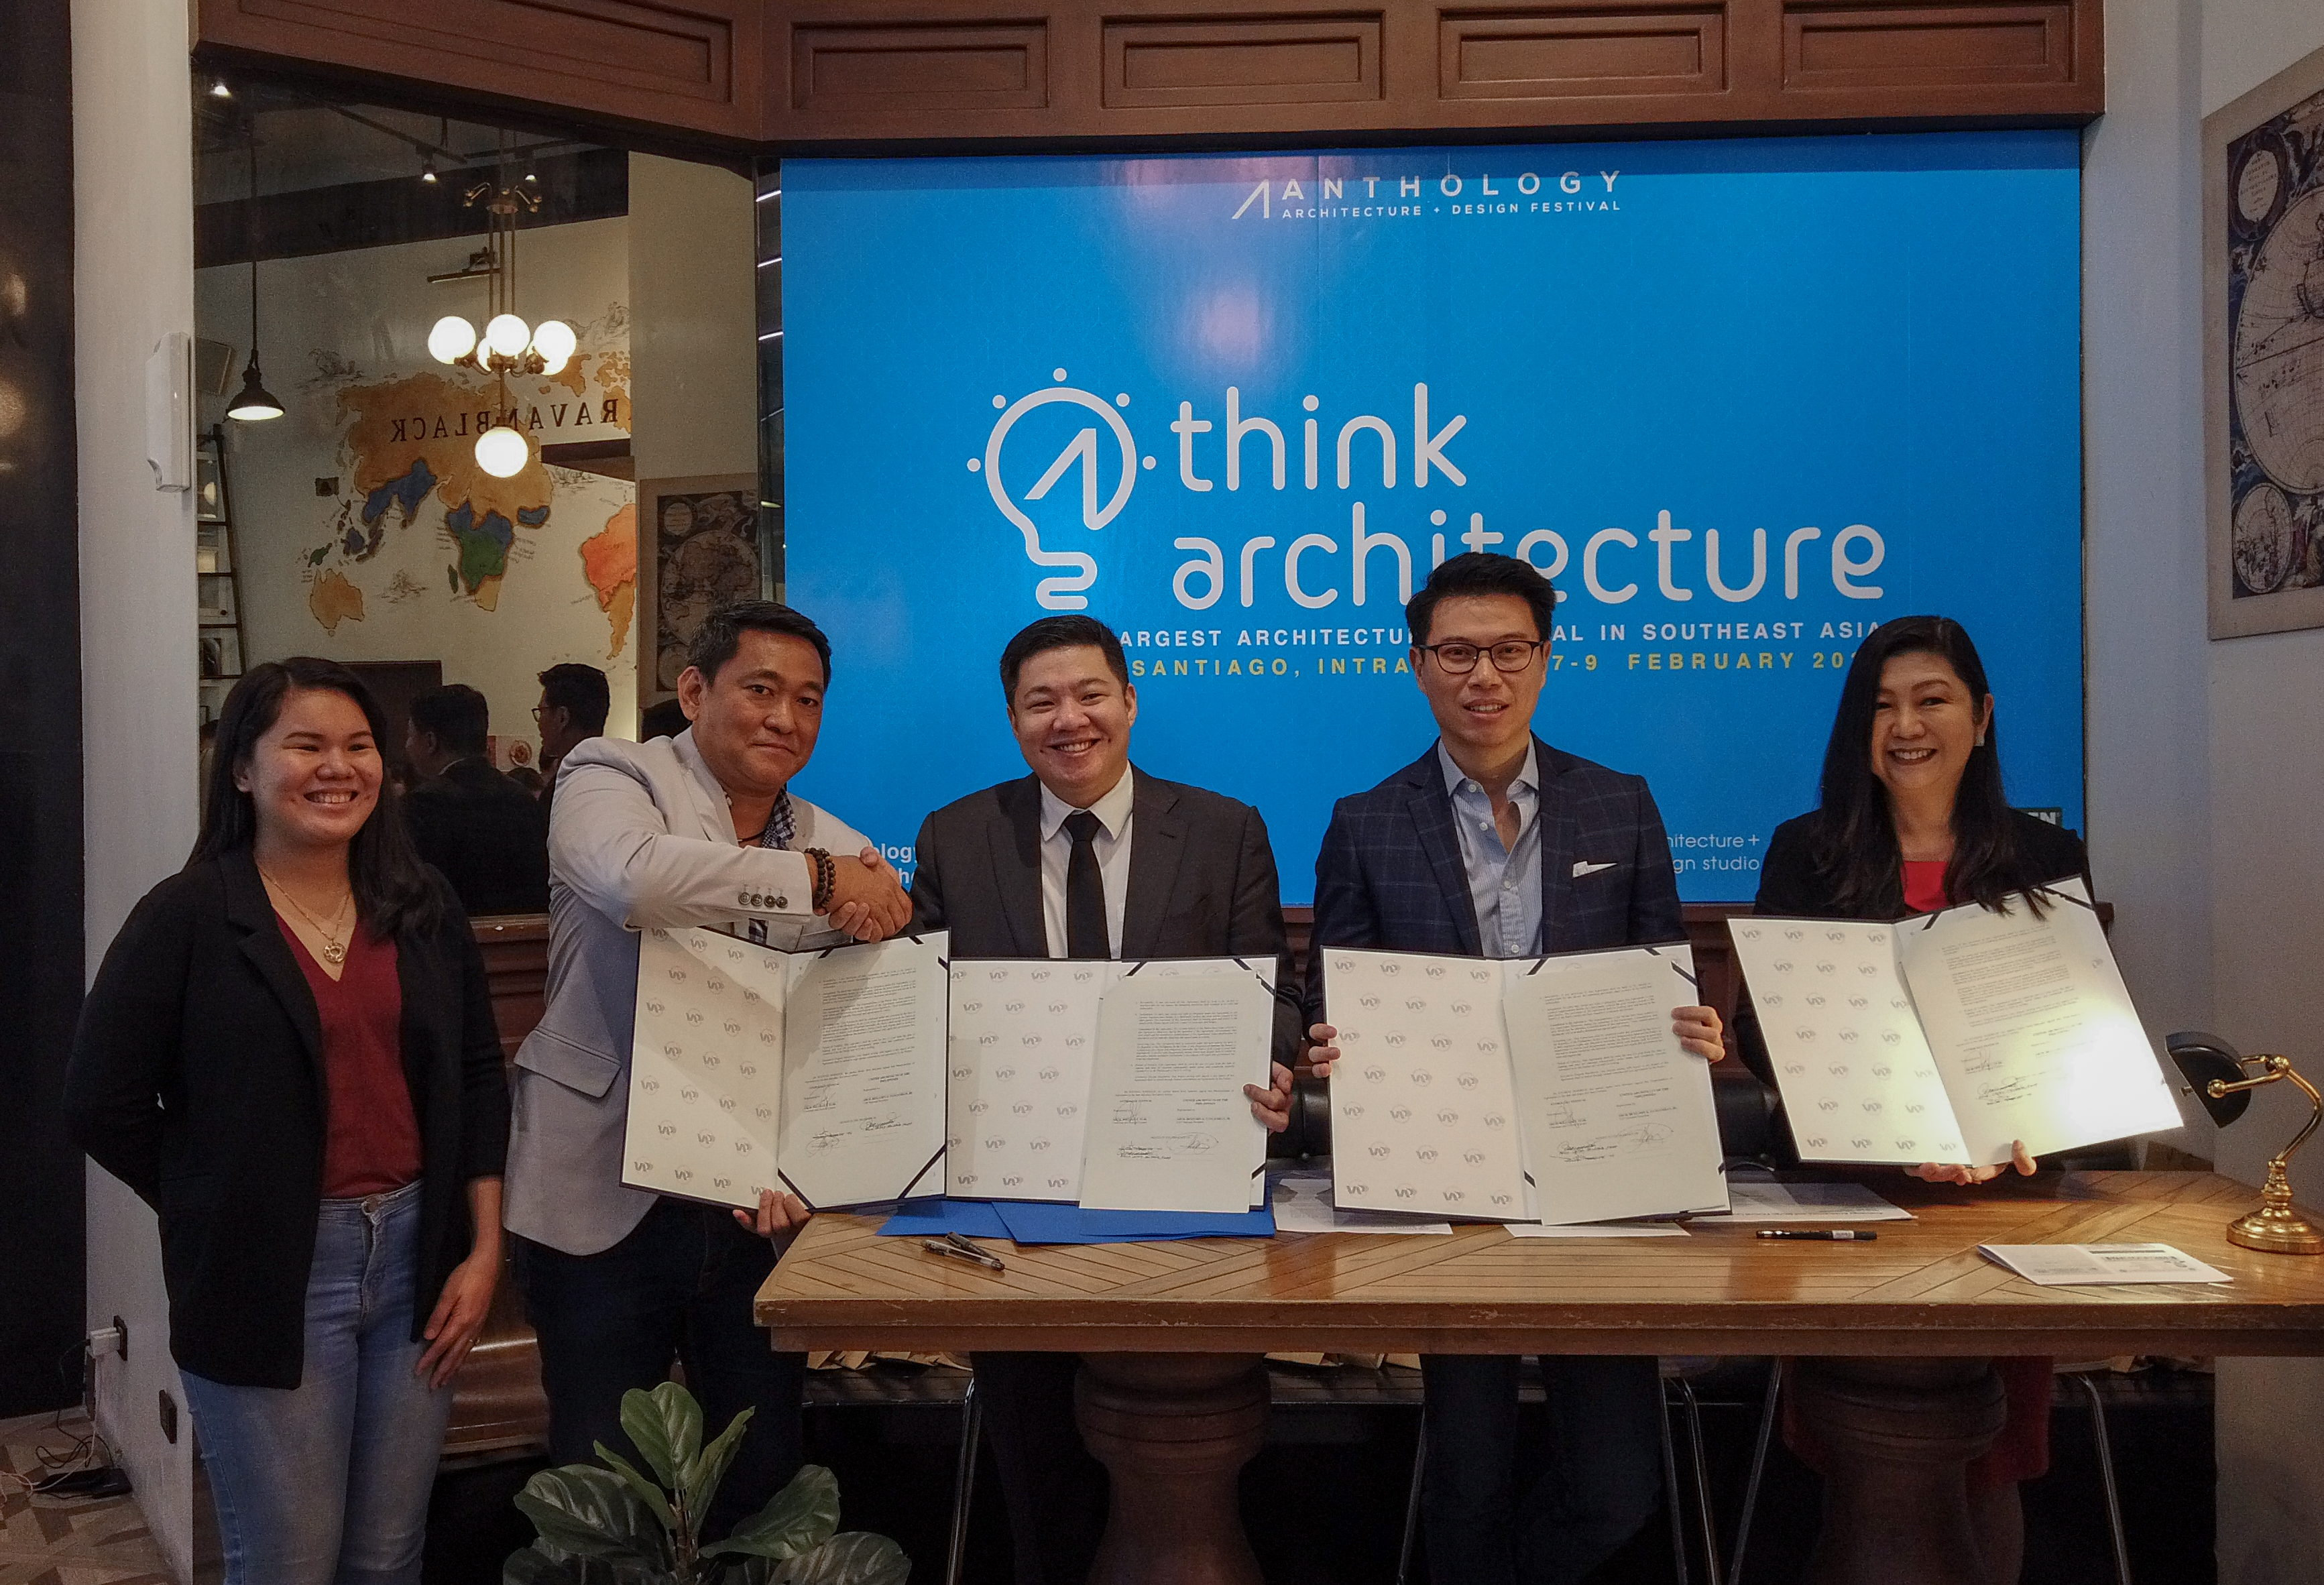 Anthology Architecture and Design Festival directors formally forge their partnership with the United Architects of the Philippines